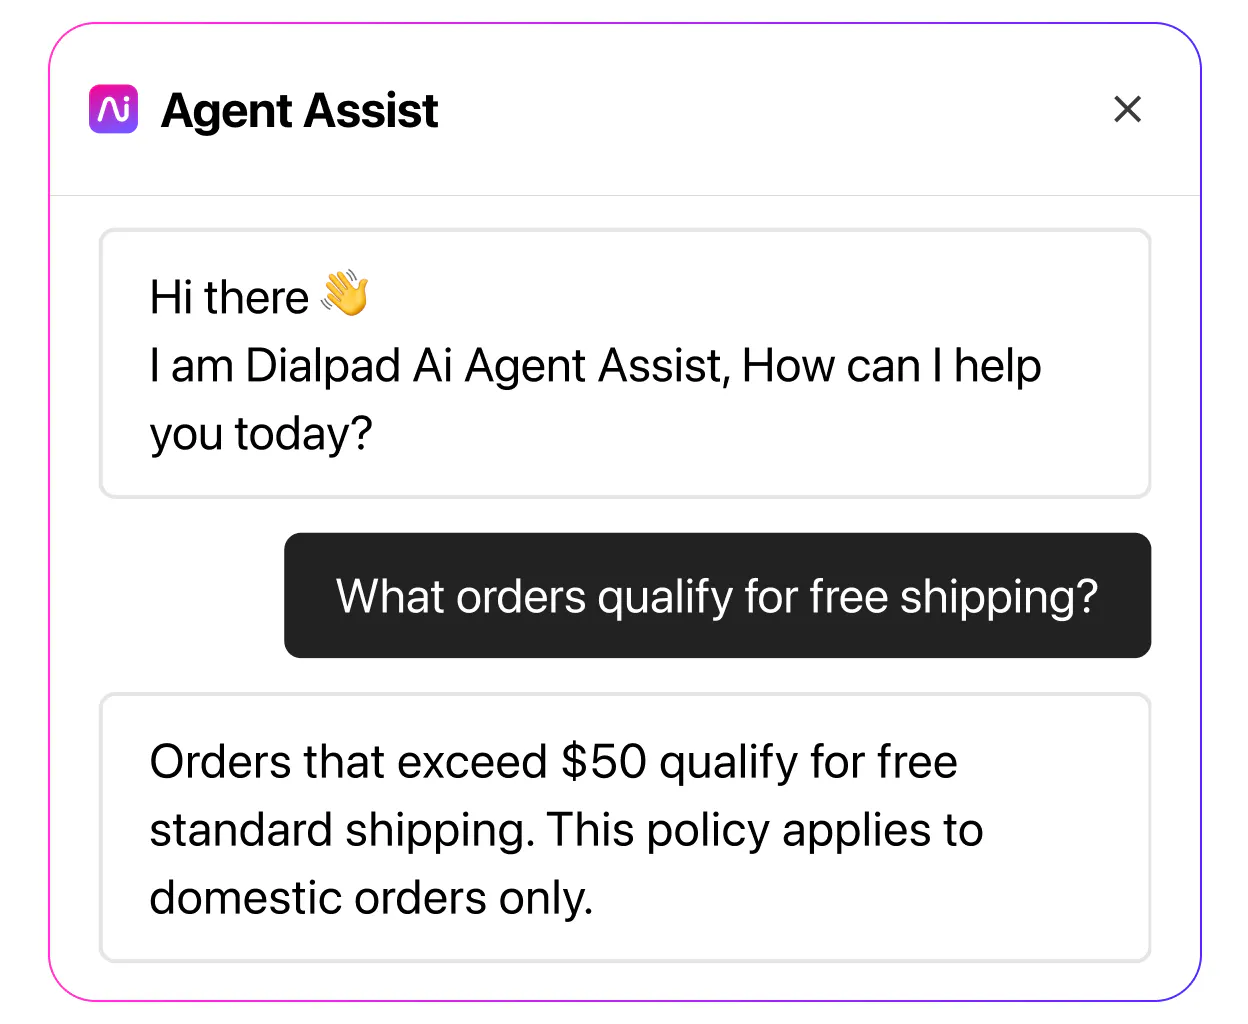 Screenshot of Dialpad’s real time assist card feature popping up helpful notes for an agent or rep when a tricky question comes up on a call